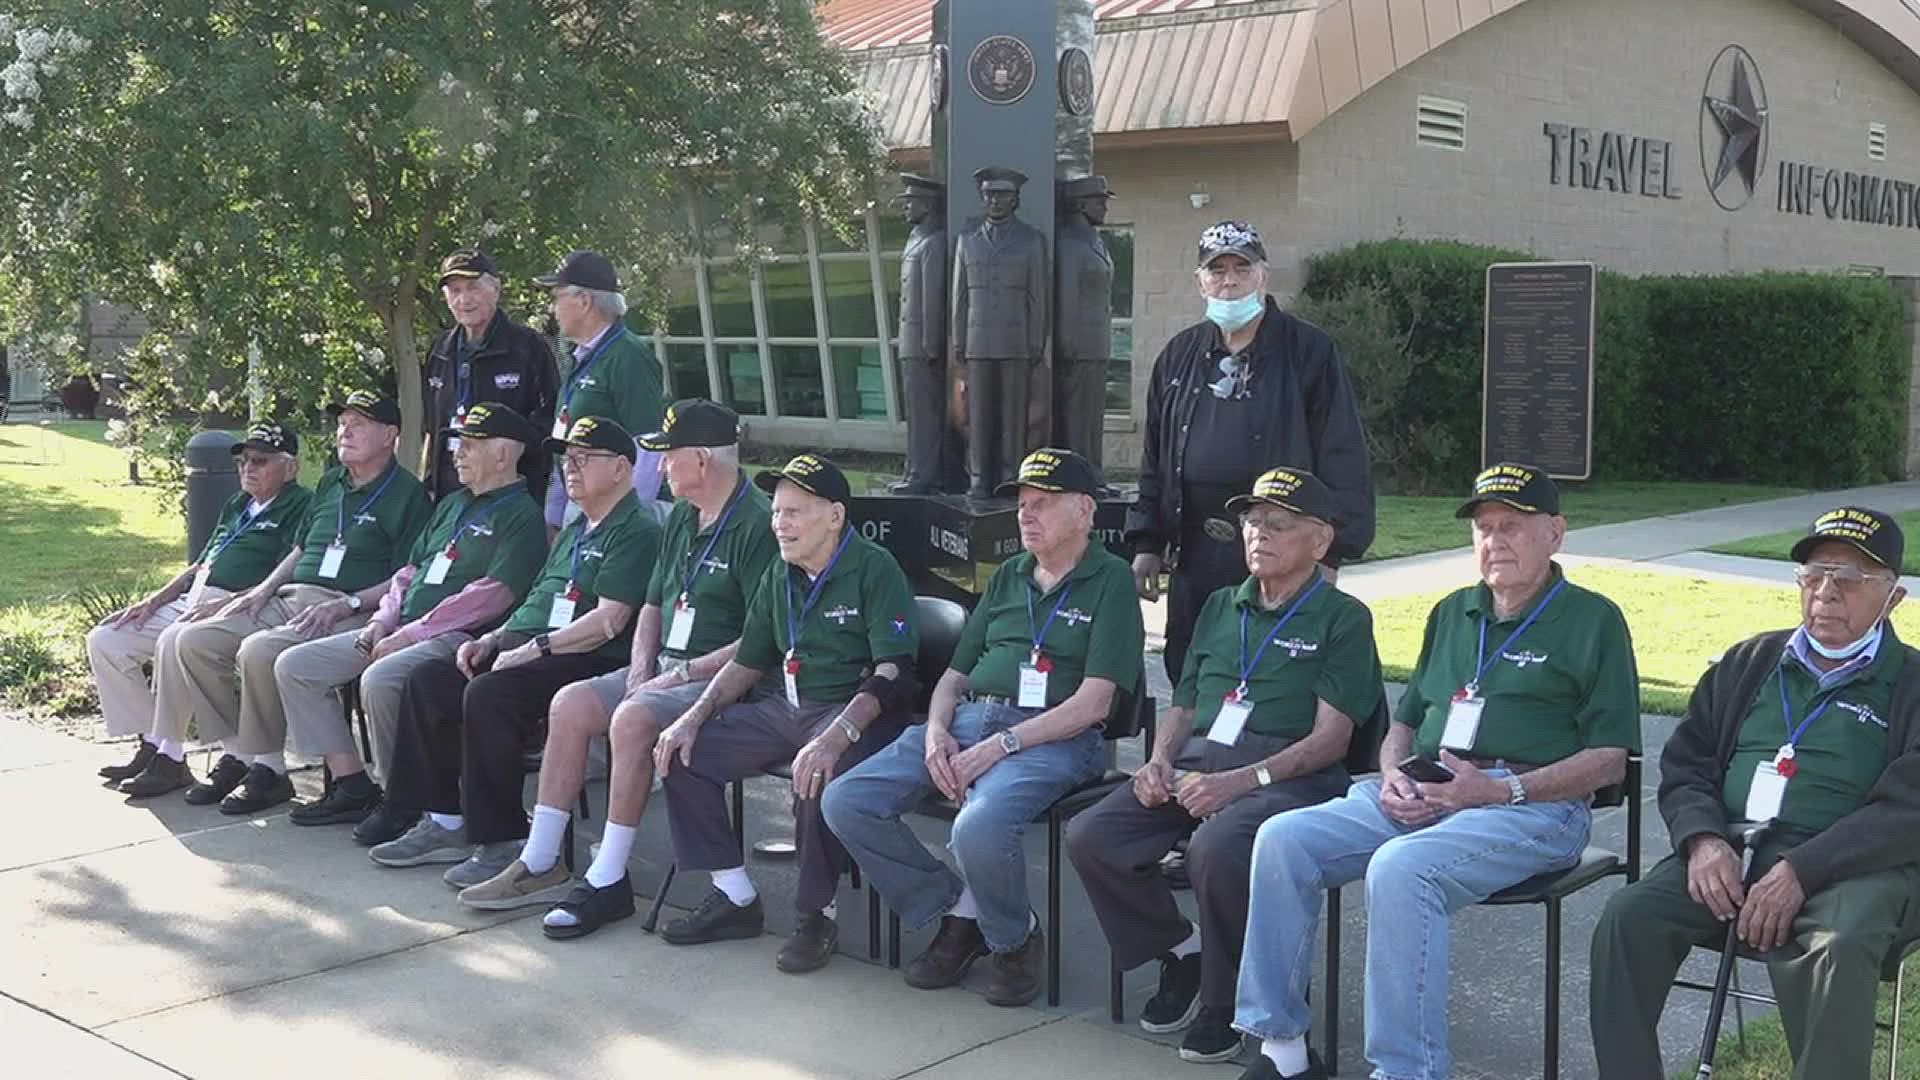 The group is mostly coming from Houston and will be visiting the World War II museum in New Orleans. The youngest veteran is 94 years old and the oldest is 102.